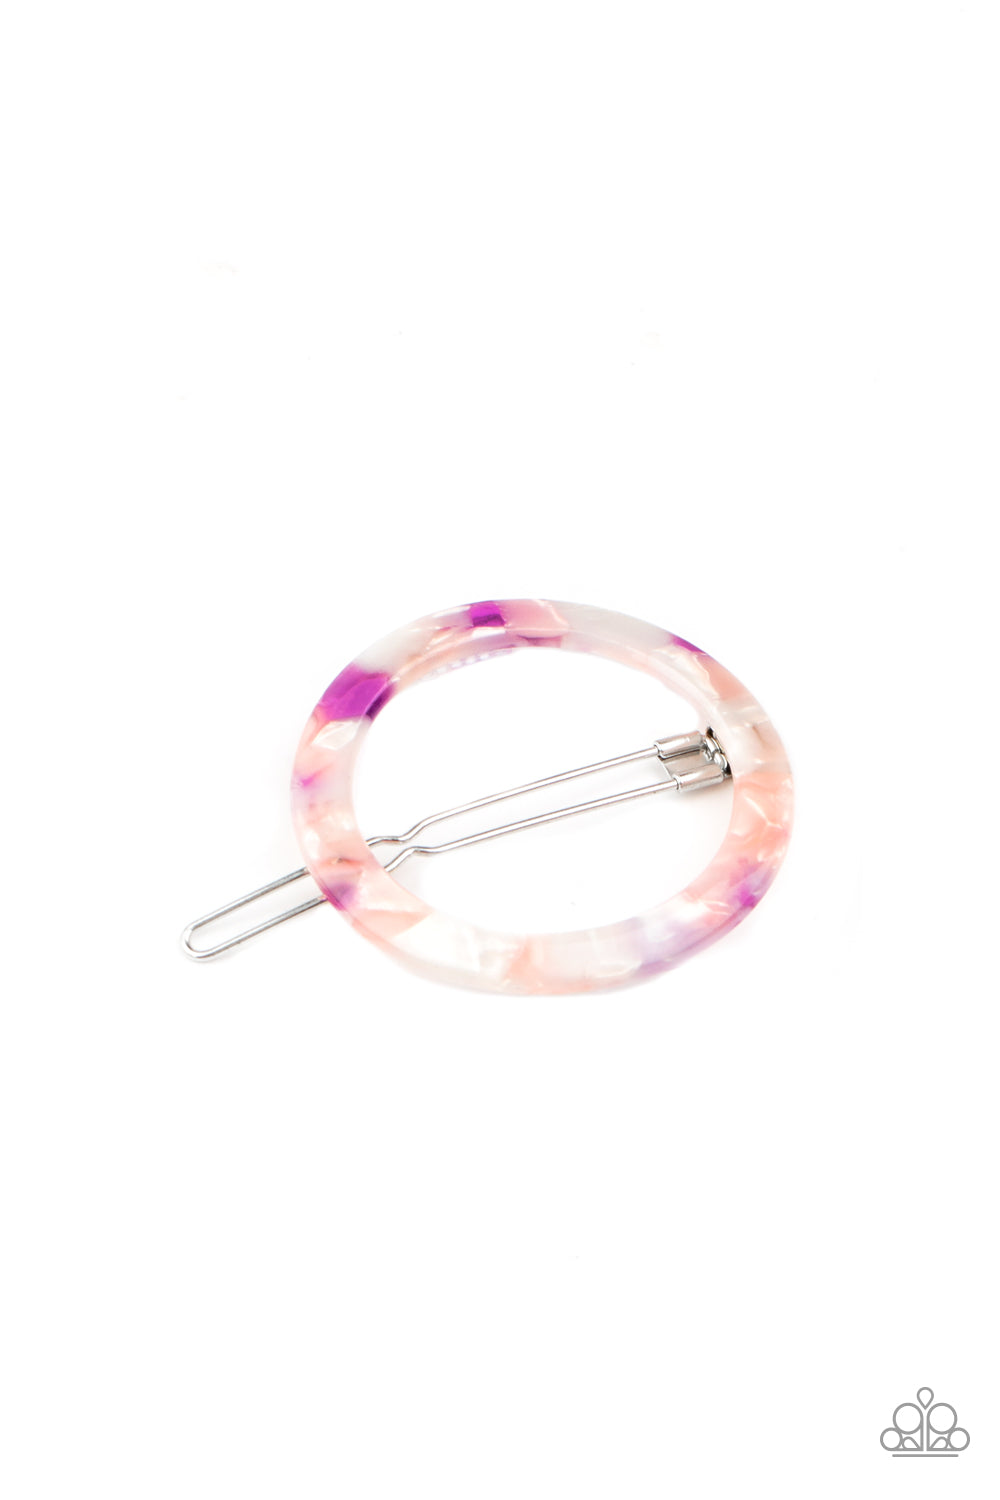 In The Round__Hair Accessories__Purple